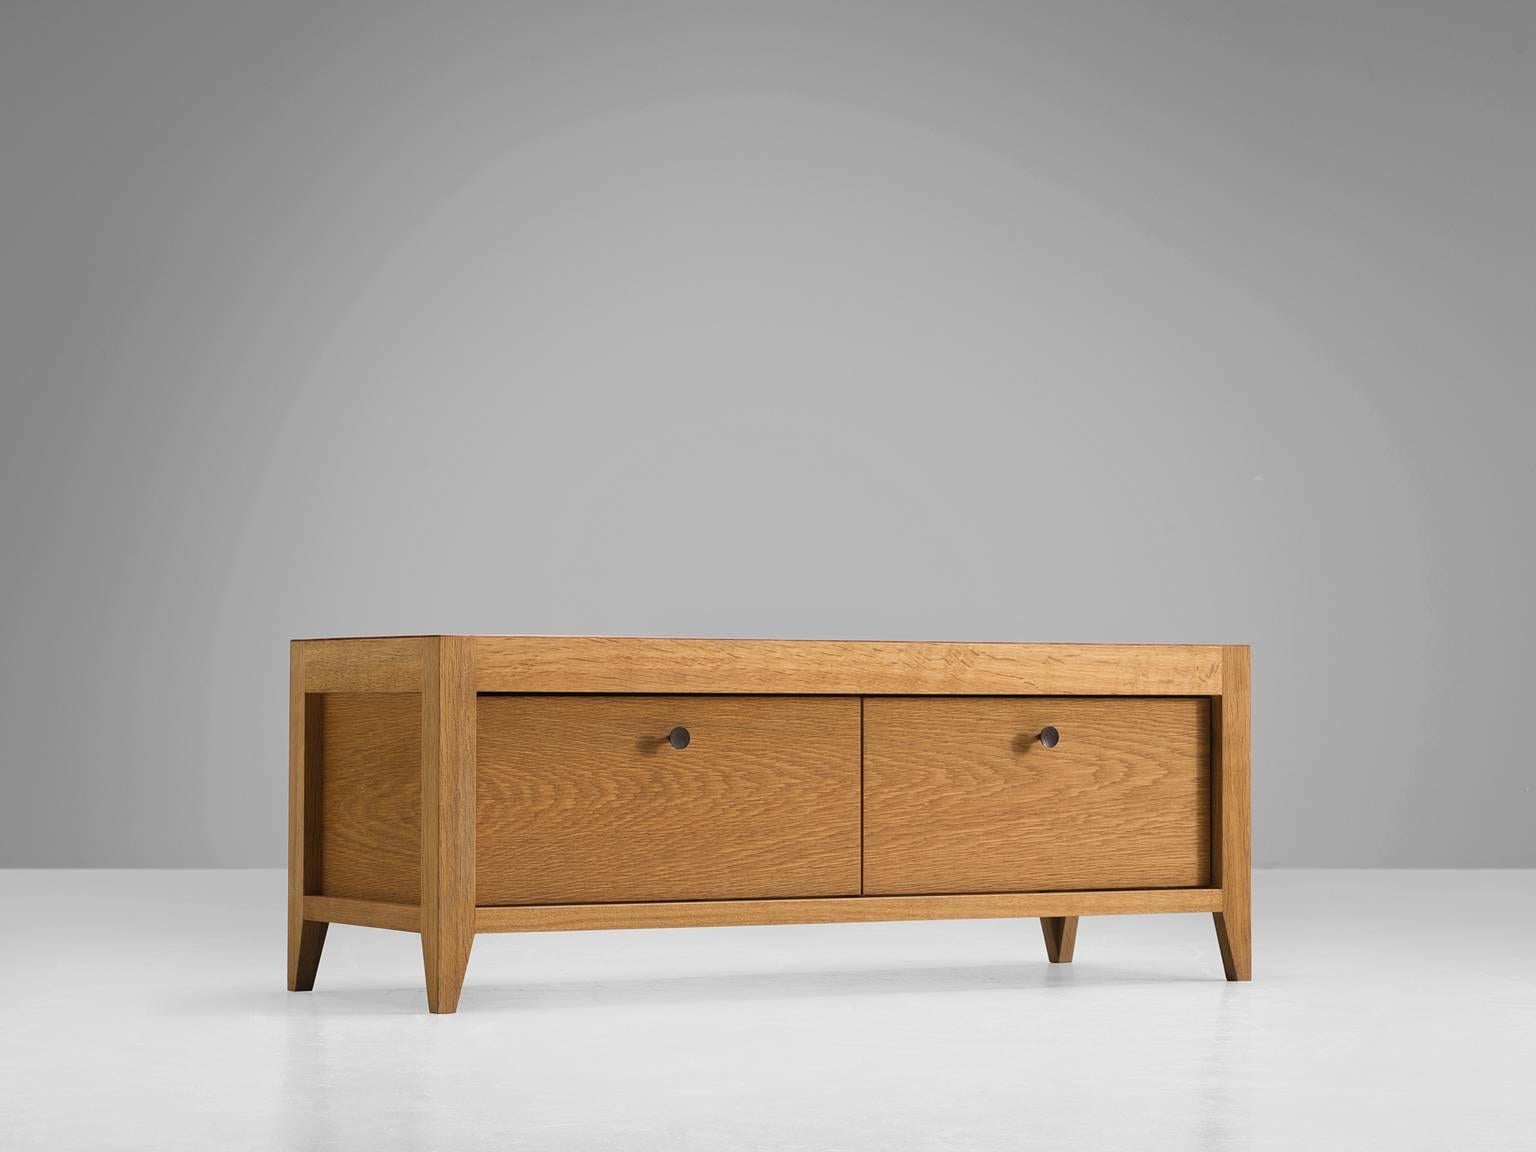 Oak side board and bench, in leather and oak, Denmark, 2000s.

This low bench versus cabinet features two drawers with browned brass handles and four short, tapered legs. The set is made by the cabinet makers in Denmark and feature the solid